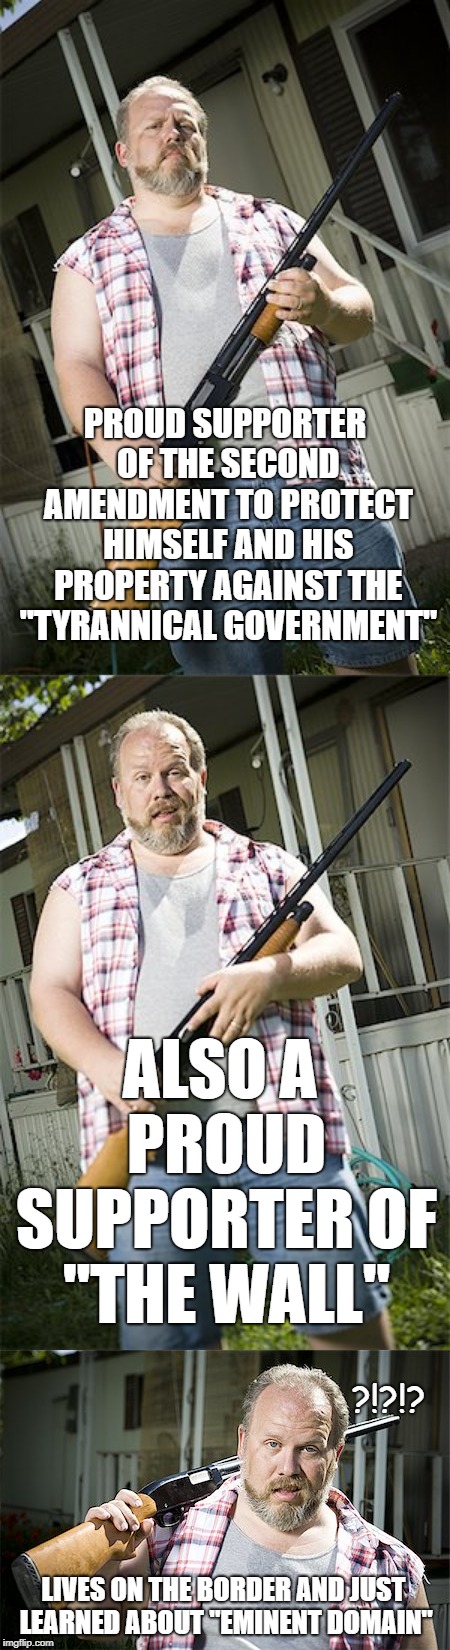 Eminent Whut? | PROUD SUPPORTER OF THE SECOND AMENDMENT TO PROTECT HIMSELF AND HIS PROPERTY AGAINST THE "TYRANNICAL GOVERNMENT"; ALSO A PROUD SUPPORTER OF "THE WALL"; ?!?!? LIVES ON THE BORDER AND JUST LEARNED ABOUT "EMINENT DOMAIN" | image tagged in 2nd amendment,gun nuts,trump wall,irony,stupid conservatives | made w/ Imgflip meme maker